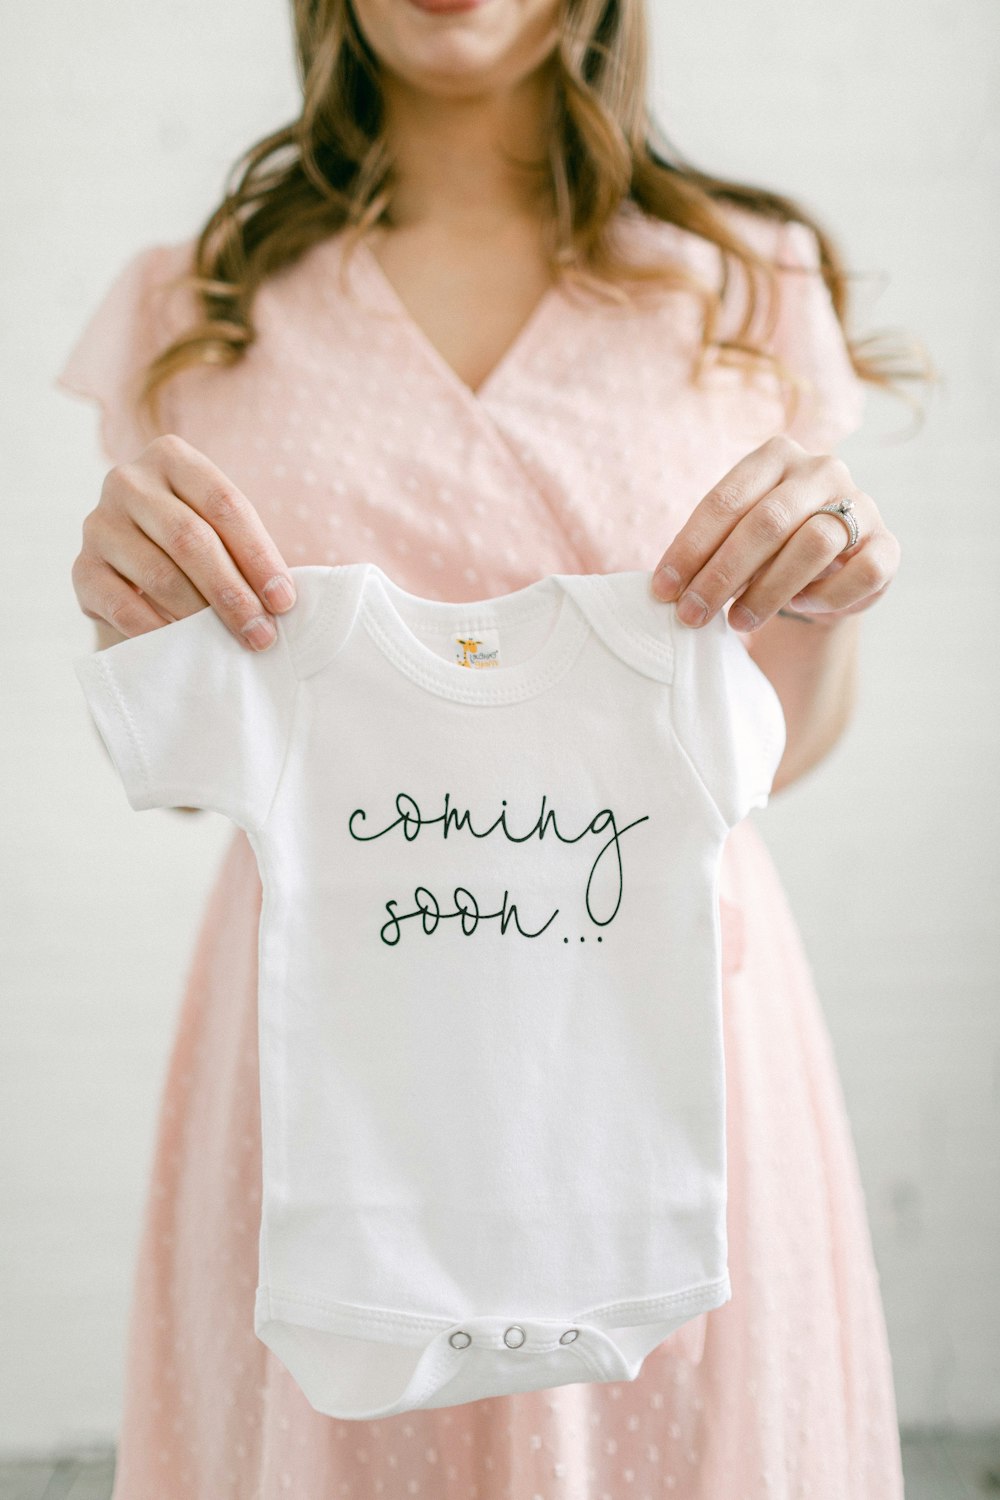 a woman holding a baby's shirt that says coming soon